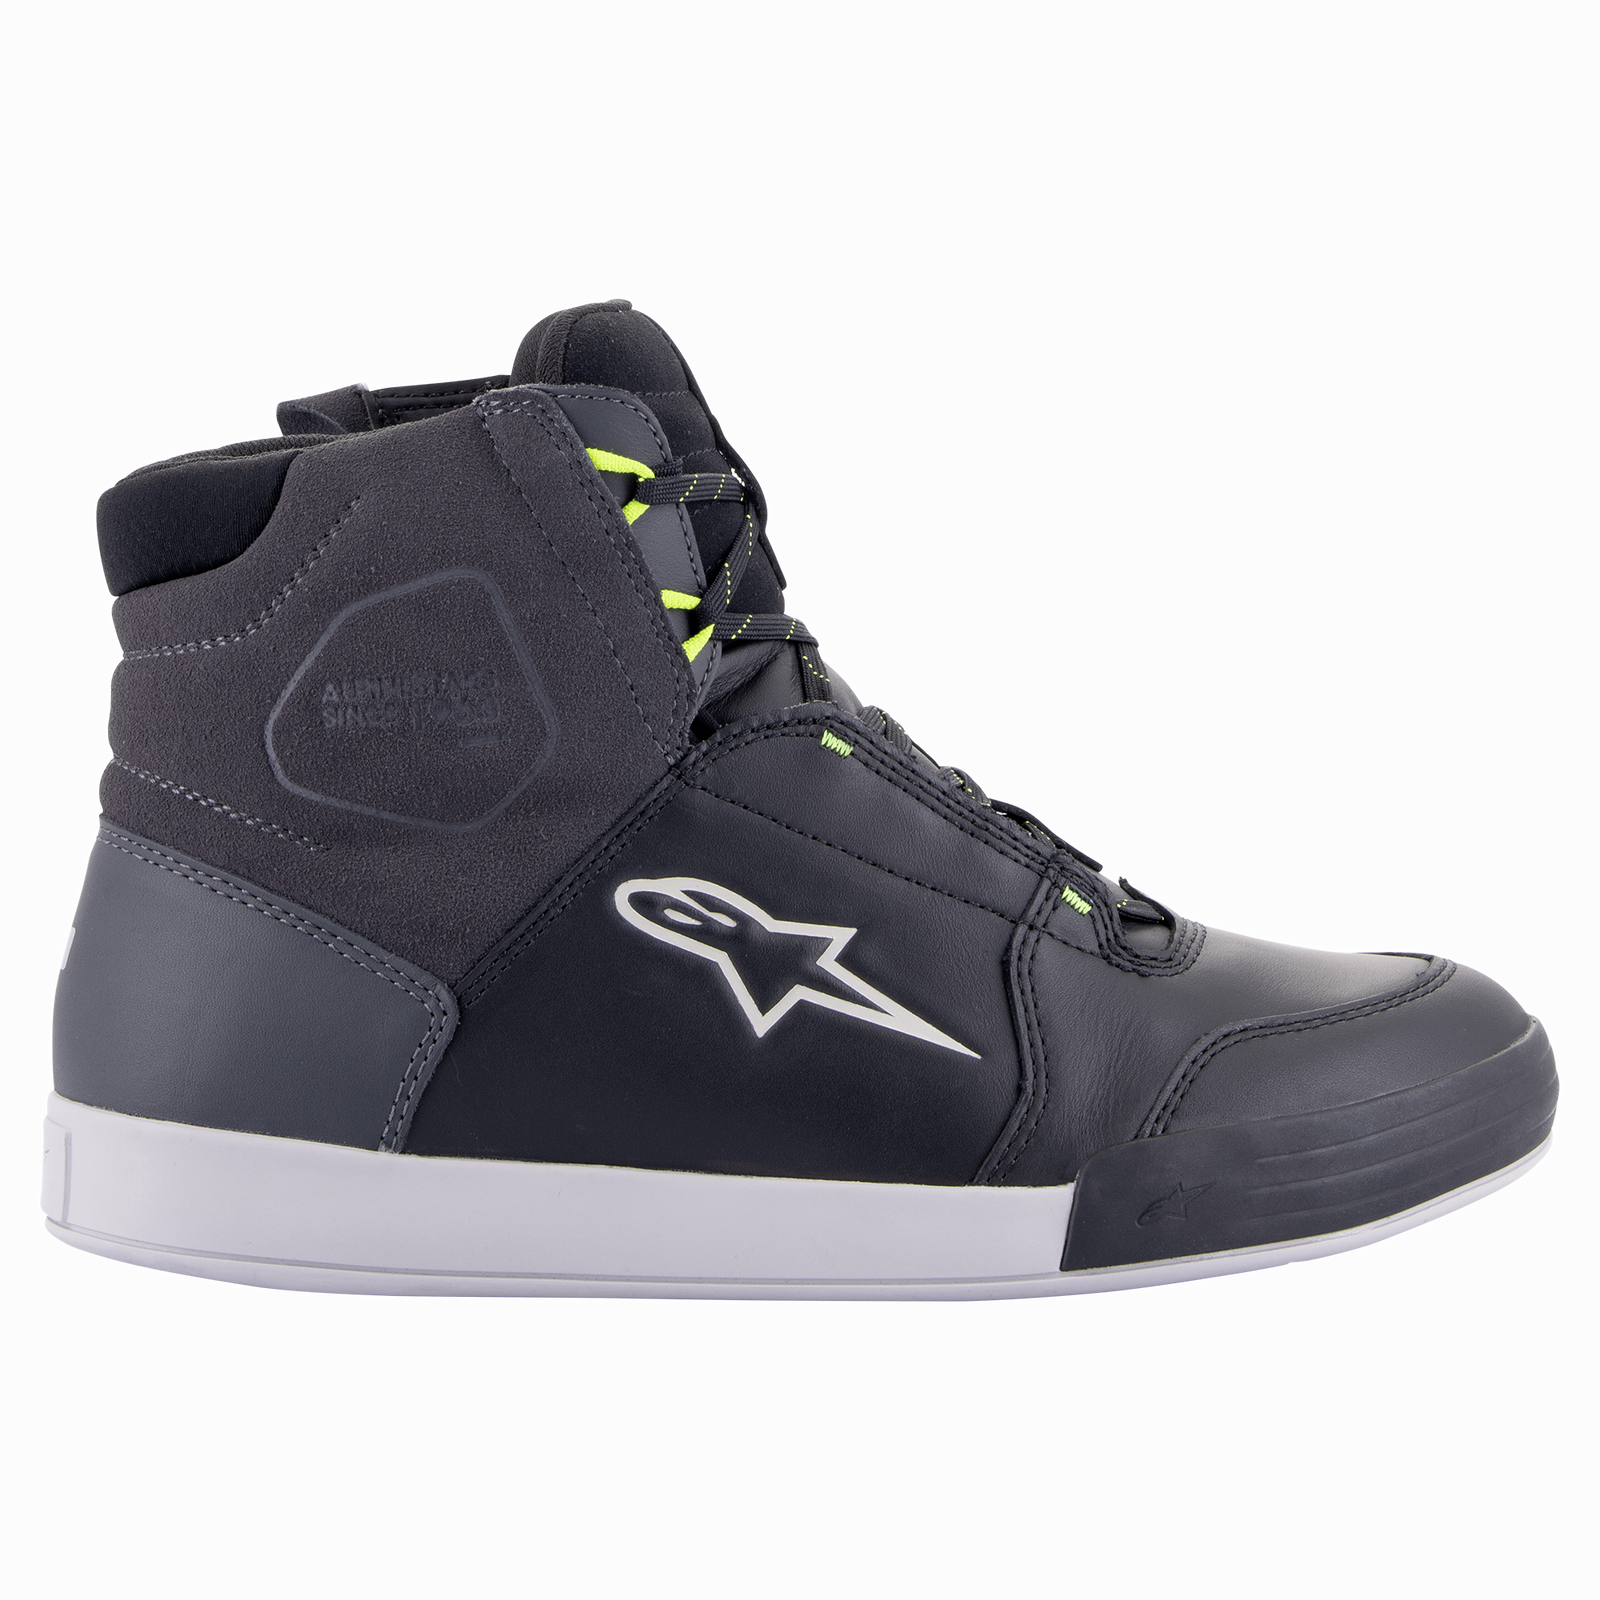 A pair of Chrome Drystar® Shoes by Alpinestars EU in black and dark gray with yellow fluo accents. These high-top shoes feature a logo resembling a stylized star on the sides and a decorative graphic detail near the heel. Perfect for the urban rider, they are laced up and set against a white background.